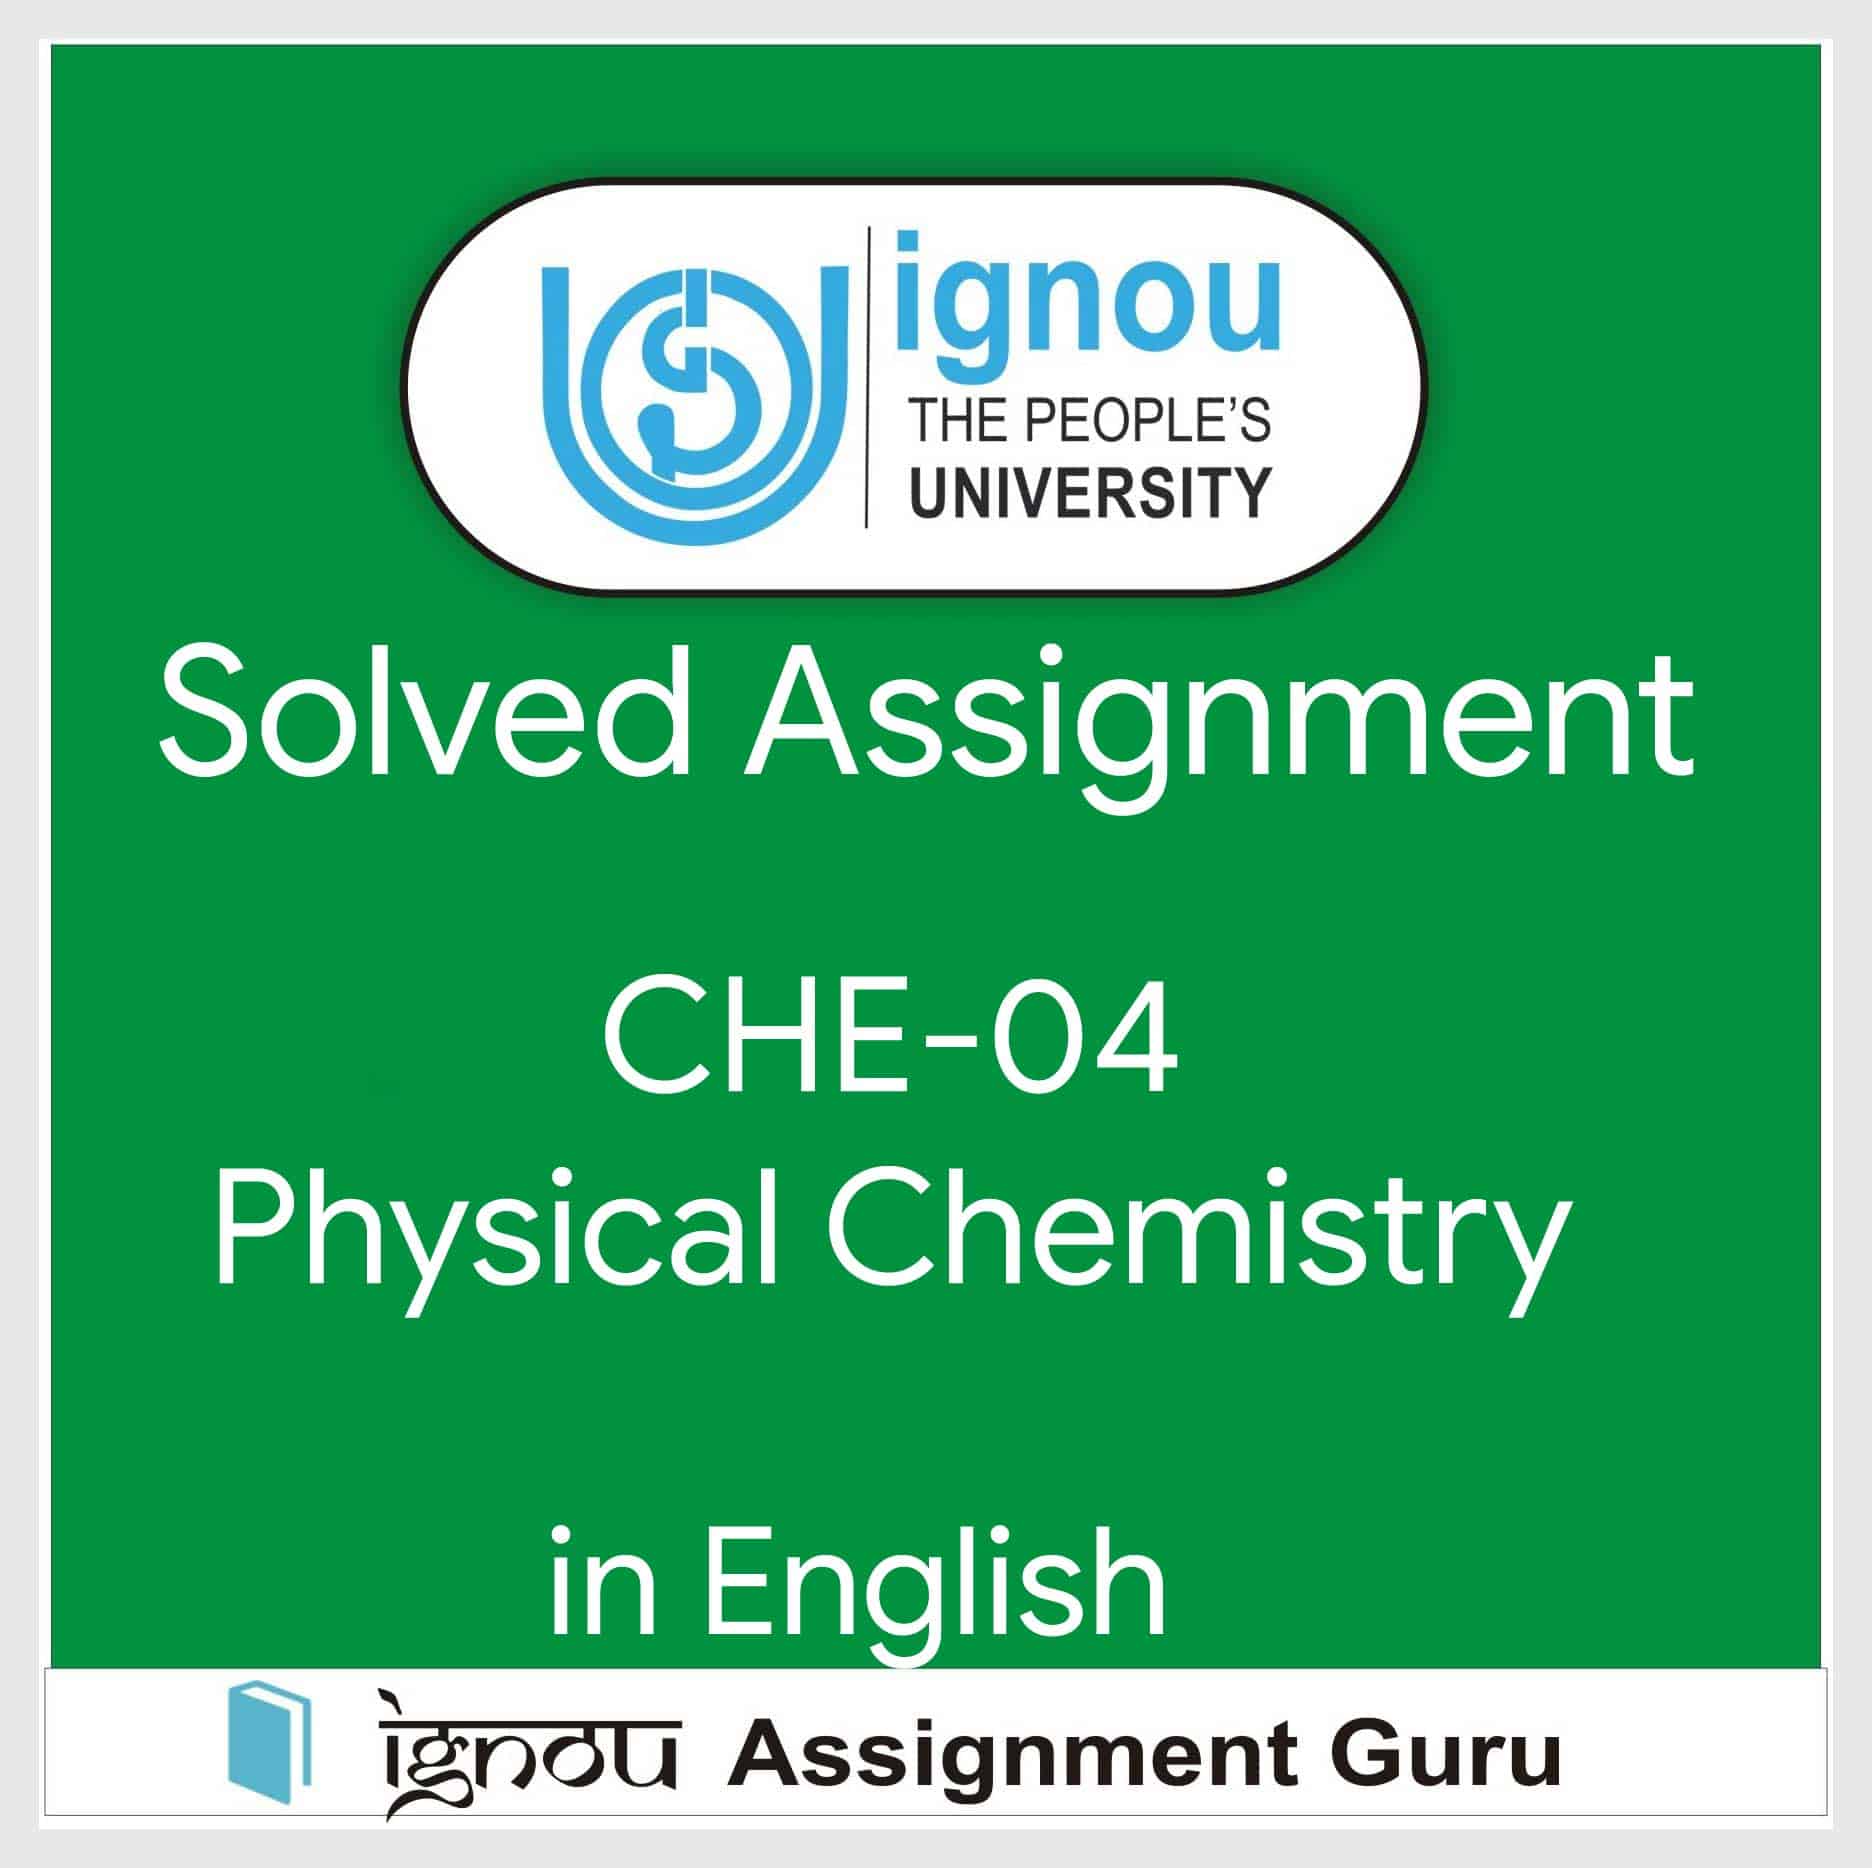 ignou solved assignment che 04